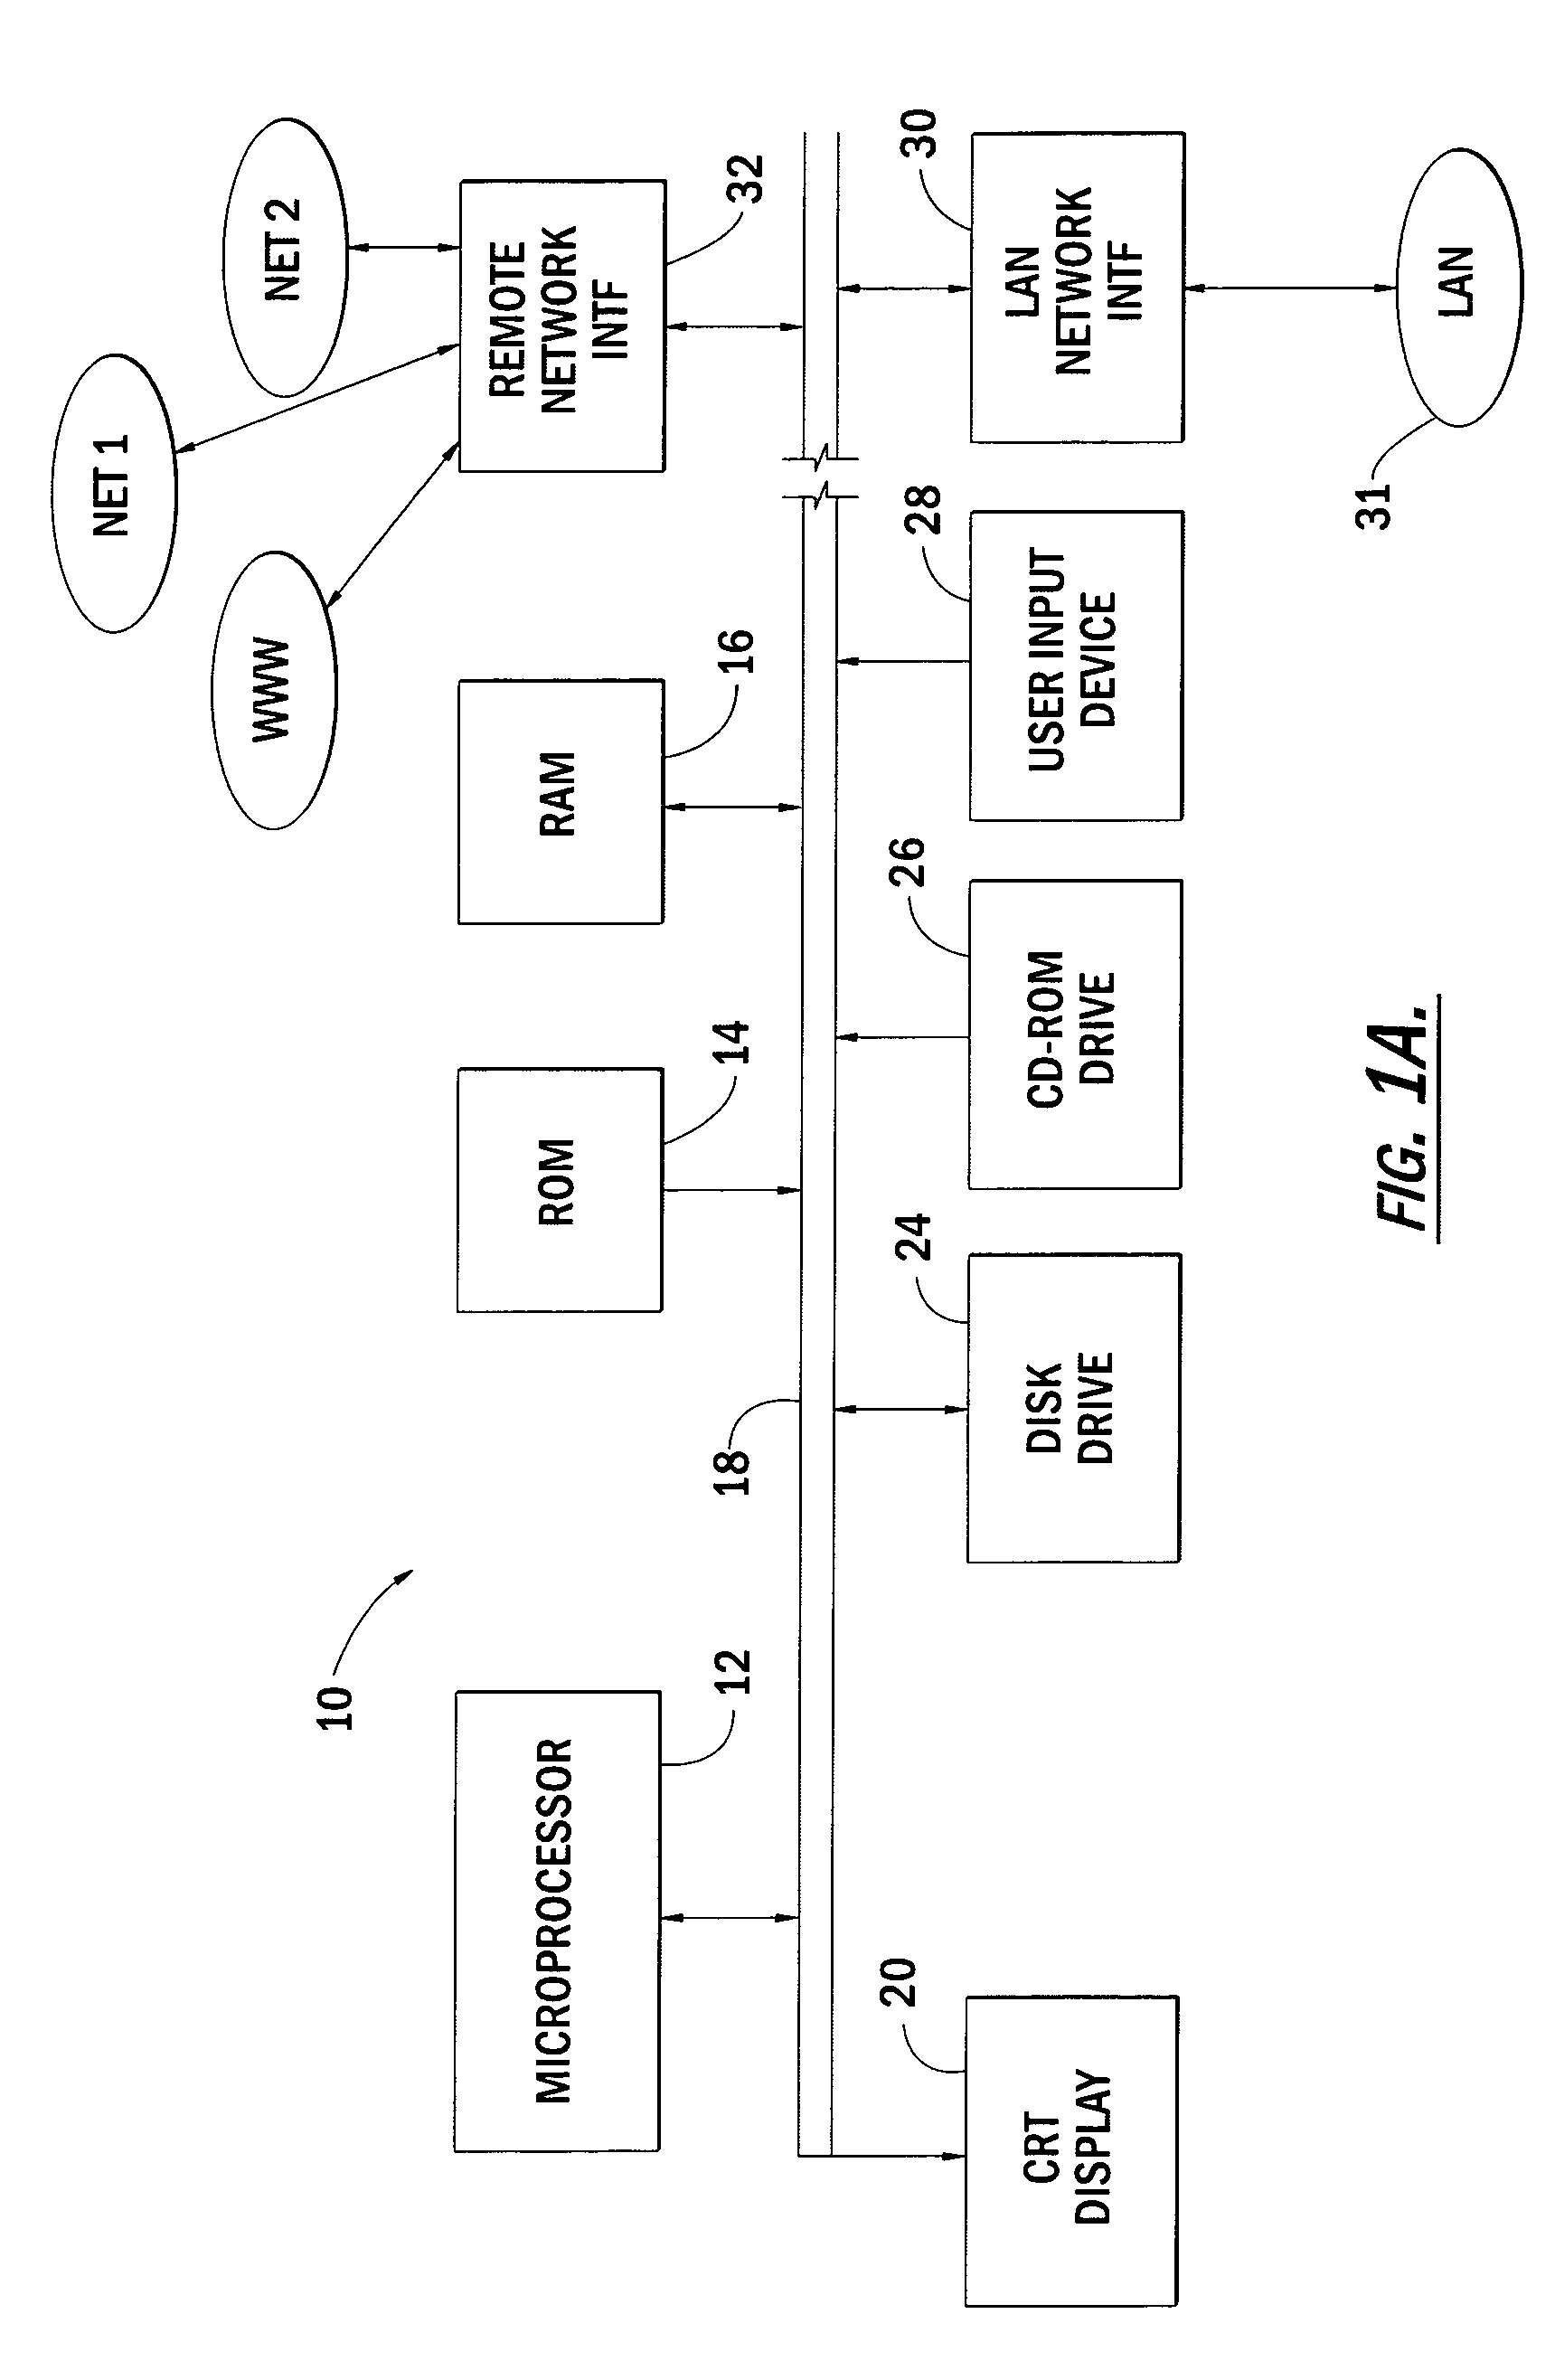 Automated individualized learning program creation system and associated methods